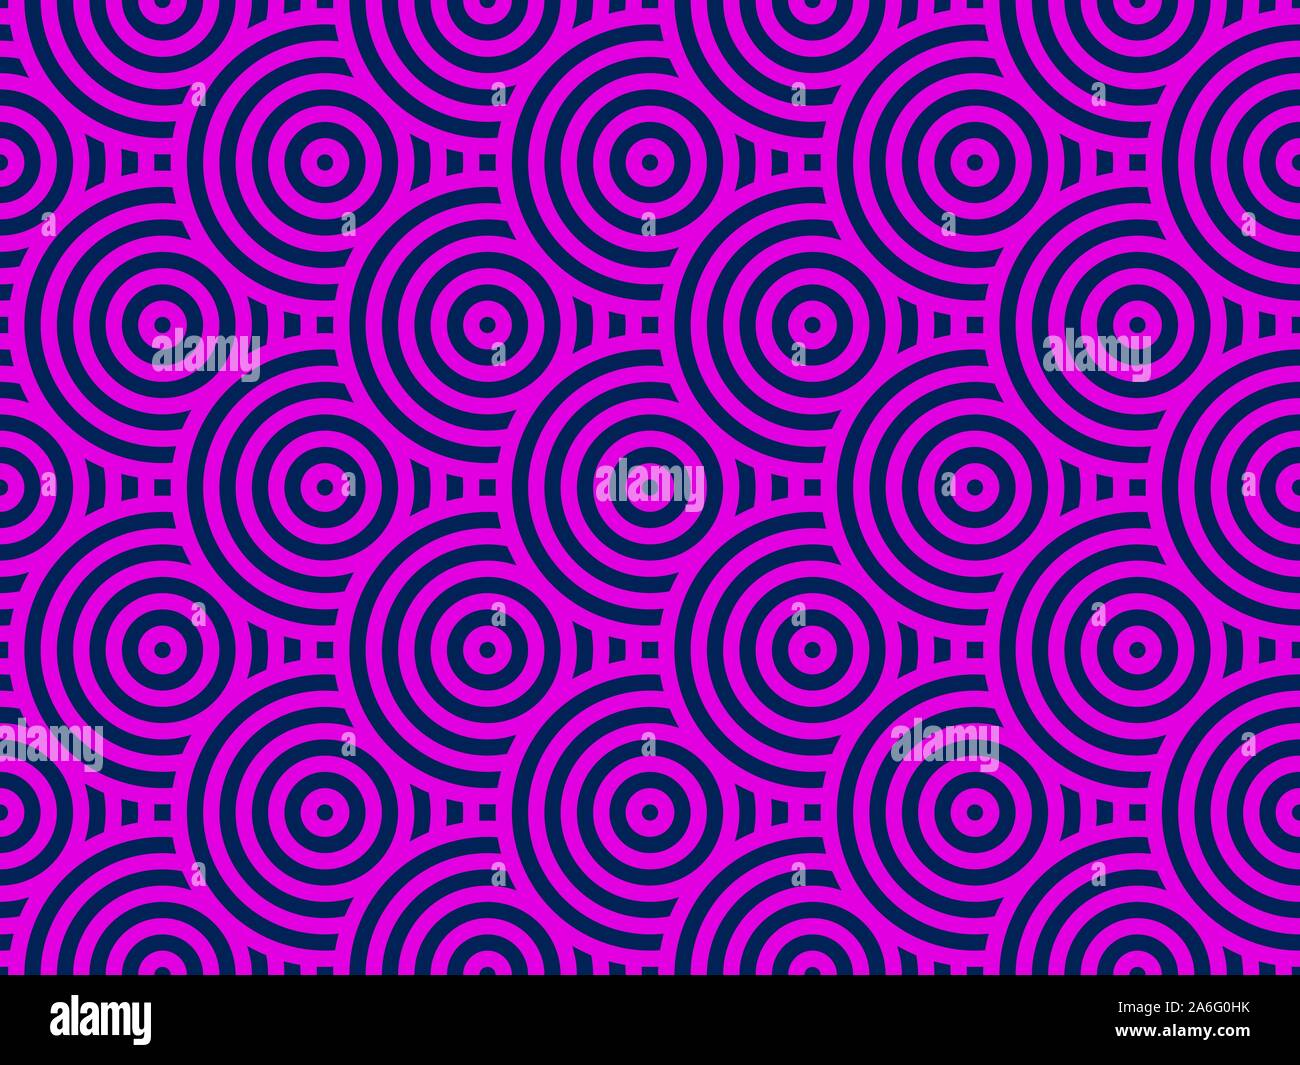 Pink and blue overlapping repeating circles background. Japanese style circles seamless pattern. Endless repeated texture. Modern spiral  vector Stock Vector